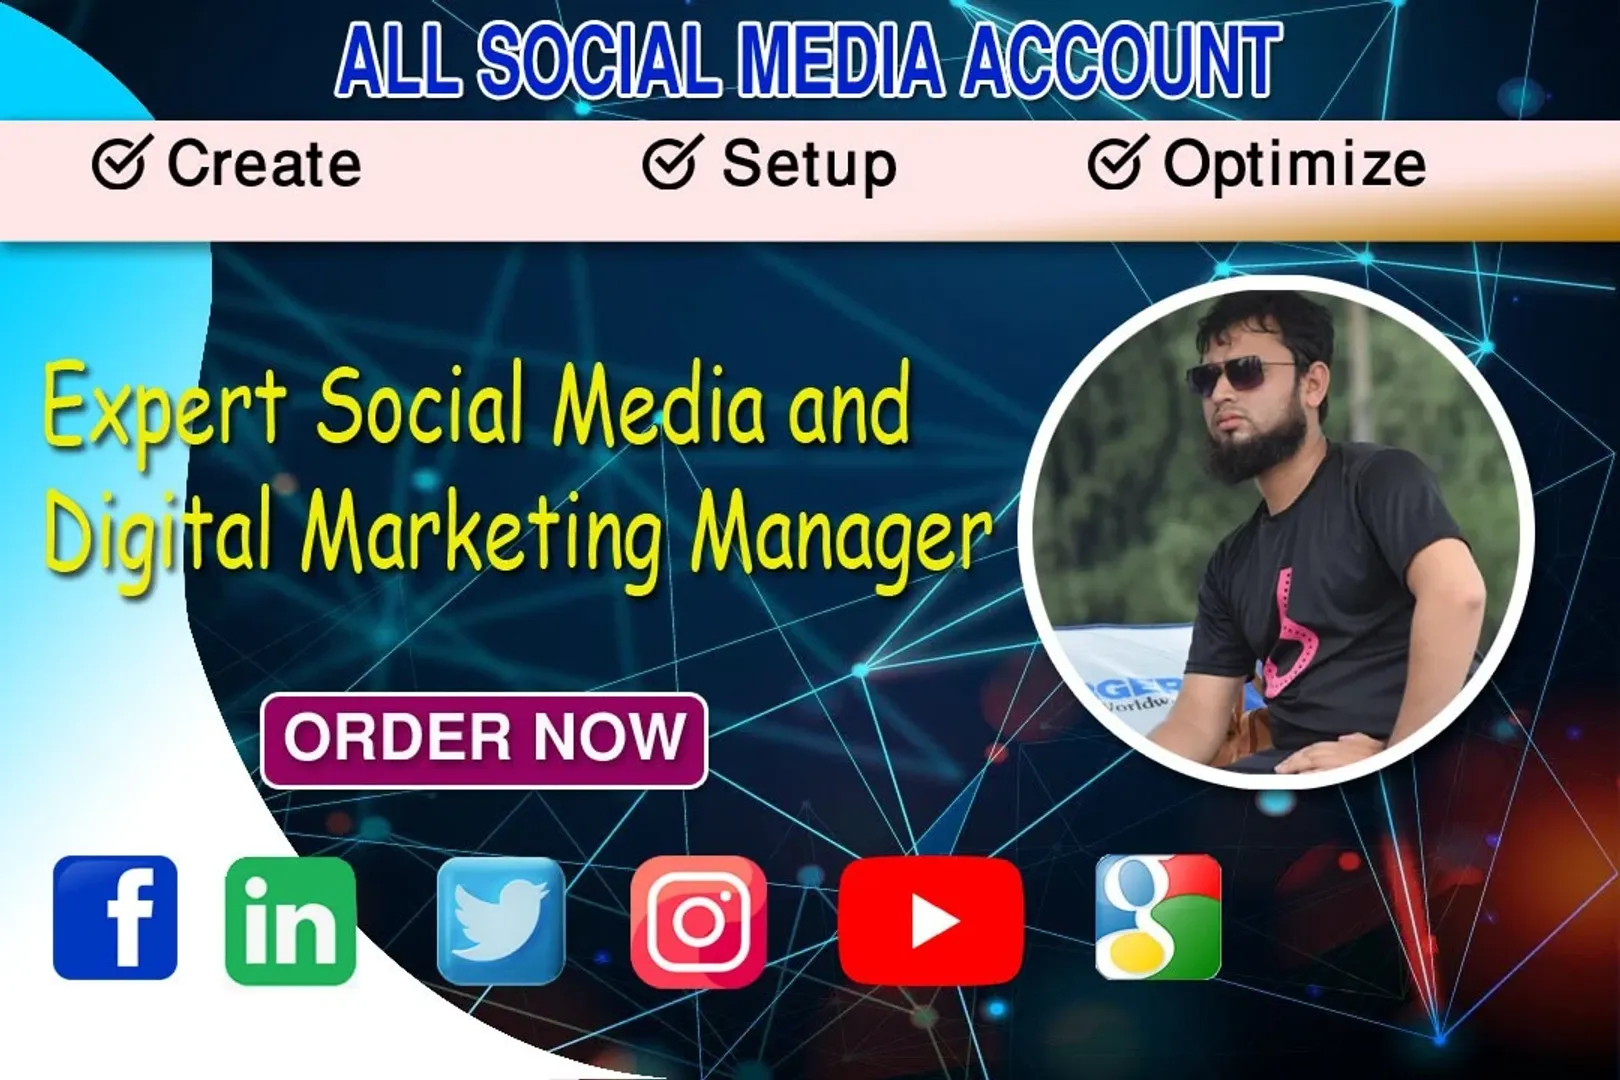 I will do social media marketing and digital marketing manager

•	I provide
1.	Creating content. 2. Create captivating posts. 3. Photo Design for Facebook, Instagram, and twitter. 4. Pixel setup. 5. Conversation API. 6. Ads campaign for all social media platform. 7. Create, Setup and use SEO to optimize your all business platform. 8. Profile setup, Tag manager setup, Monetization. 9. Tracking growth and performance with regular statistics and progress report.
#socialmediamarketing #socialmediamarketingtips #SocialMediaMarketingStrategist #socialmediamarketingtip #socialmediamarketingagency #socialmediamarketingplan #socialmediamarketingstrategy #socialmediamarketing101 #socialmediamarketingconsultant #SocialMediaMarketingServices #SocialMediamarketingpro #socialmediamarketingfirm #socialmediamarketingtingtips #socialmediamarketingtraining #socialmediamarketingmarketing #socialmediamarketingmanager #socialmediamarketingworld #socialmediamarketingcoach #socialmediamarketingagentur #socialmediamarketinginterns #socialmediamarketingItaly #socialmediamarketingutips#digitalmarketingagency #digitalmarketingtips #digitalmarketingstrategy #digitalmarketingtraining #digitalmarketingstrategist #digitalmarketingtools #digitalmarketingconsultant #digitalmarketingexpert #DigitalMarketingThailand #digitalmarketingservices #digitalmarketinglife #digitalmarketingstrategies #digitalmarketingplan #digitalmarketingtip #digitalmarketingturistico #digitalmarketingdubai #digitalmarketingcompany #DigitalMarketingConsultants #digitalmarketingpanama #digitalmarketingblog #DigitalMarketingSolutions #digitalmarketingnigeria #digitalmarketingblueprint #digitalmarketingcourse #DigitalMarketingBusiness #digitalmarketinginstitute #digitalmarketingindustry #digitalmarketing1 #digitalmarketingindia #digitalmarketing2018
If you need any service please click here https://shorturl.at/dnZ37